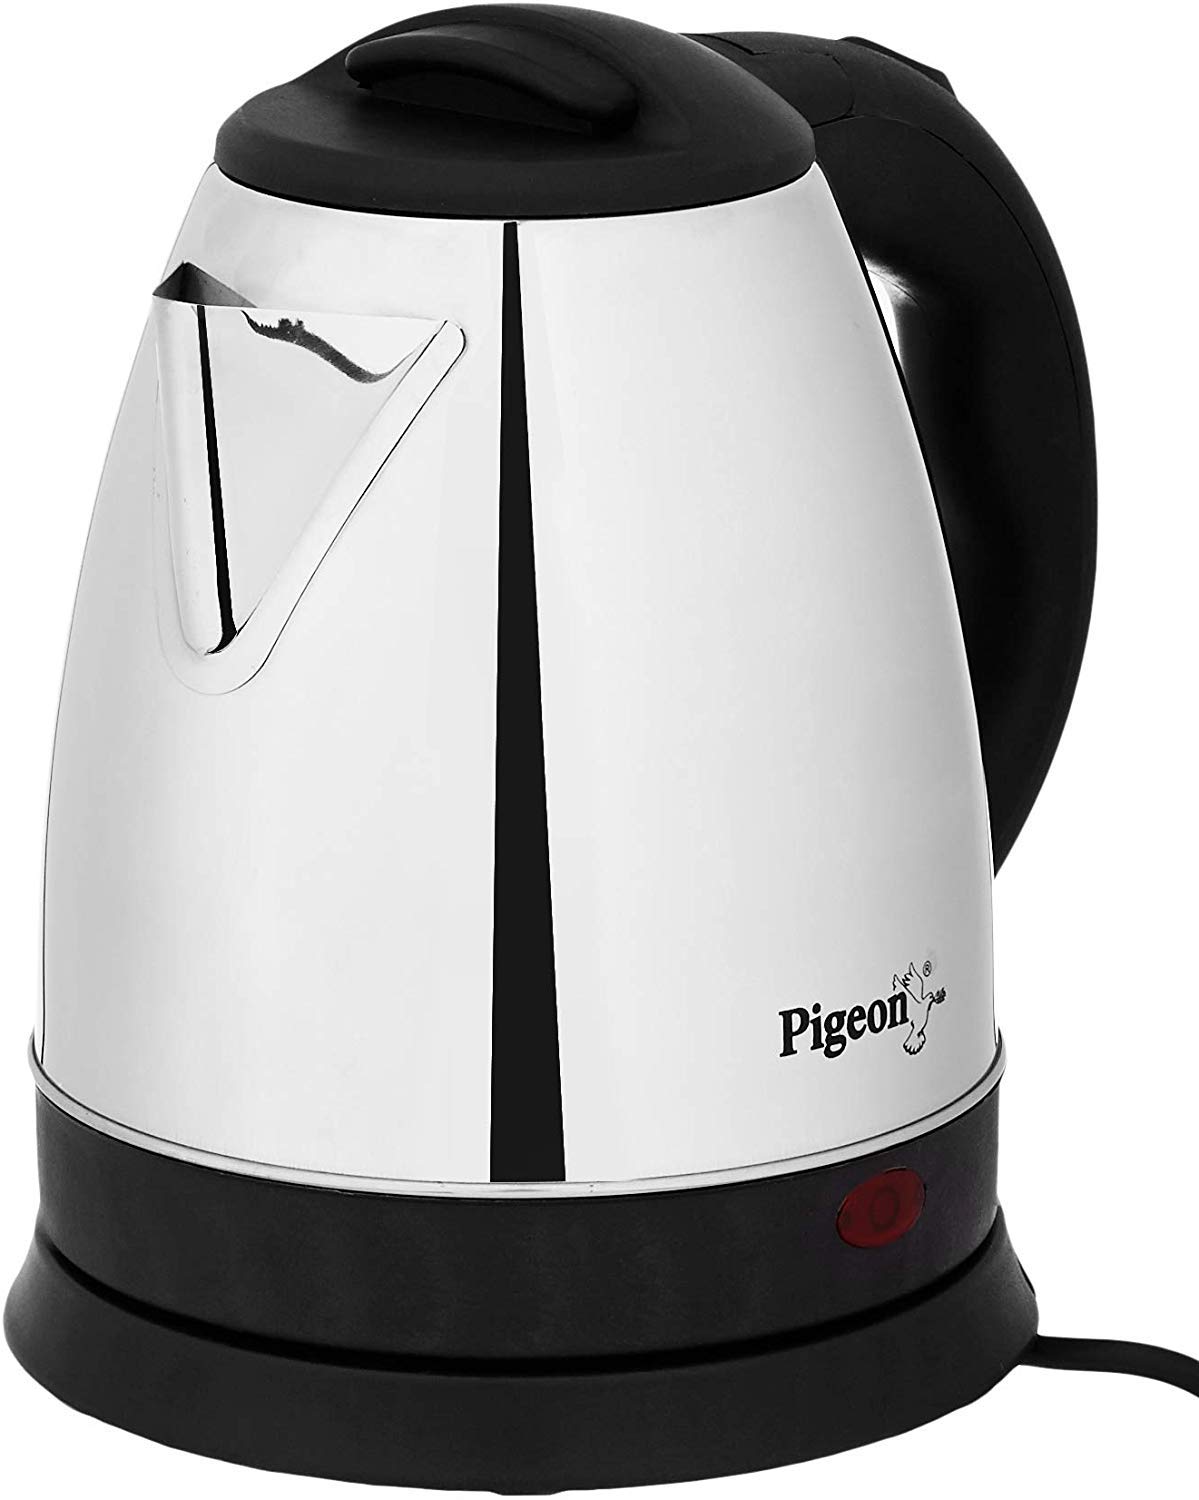 Pigeon Electric Kettle Price In India